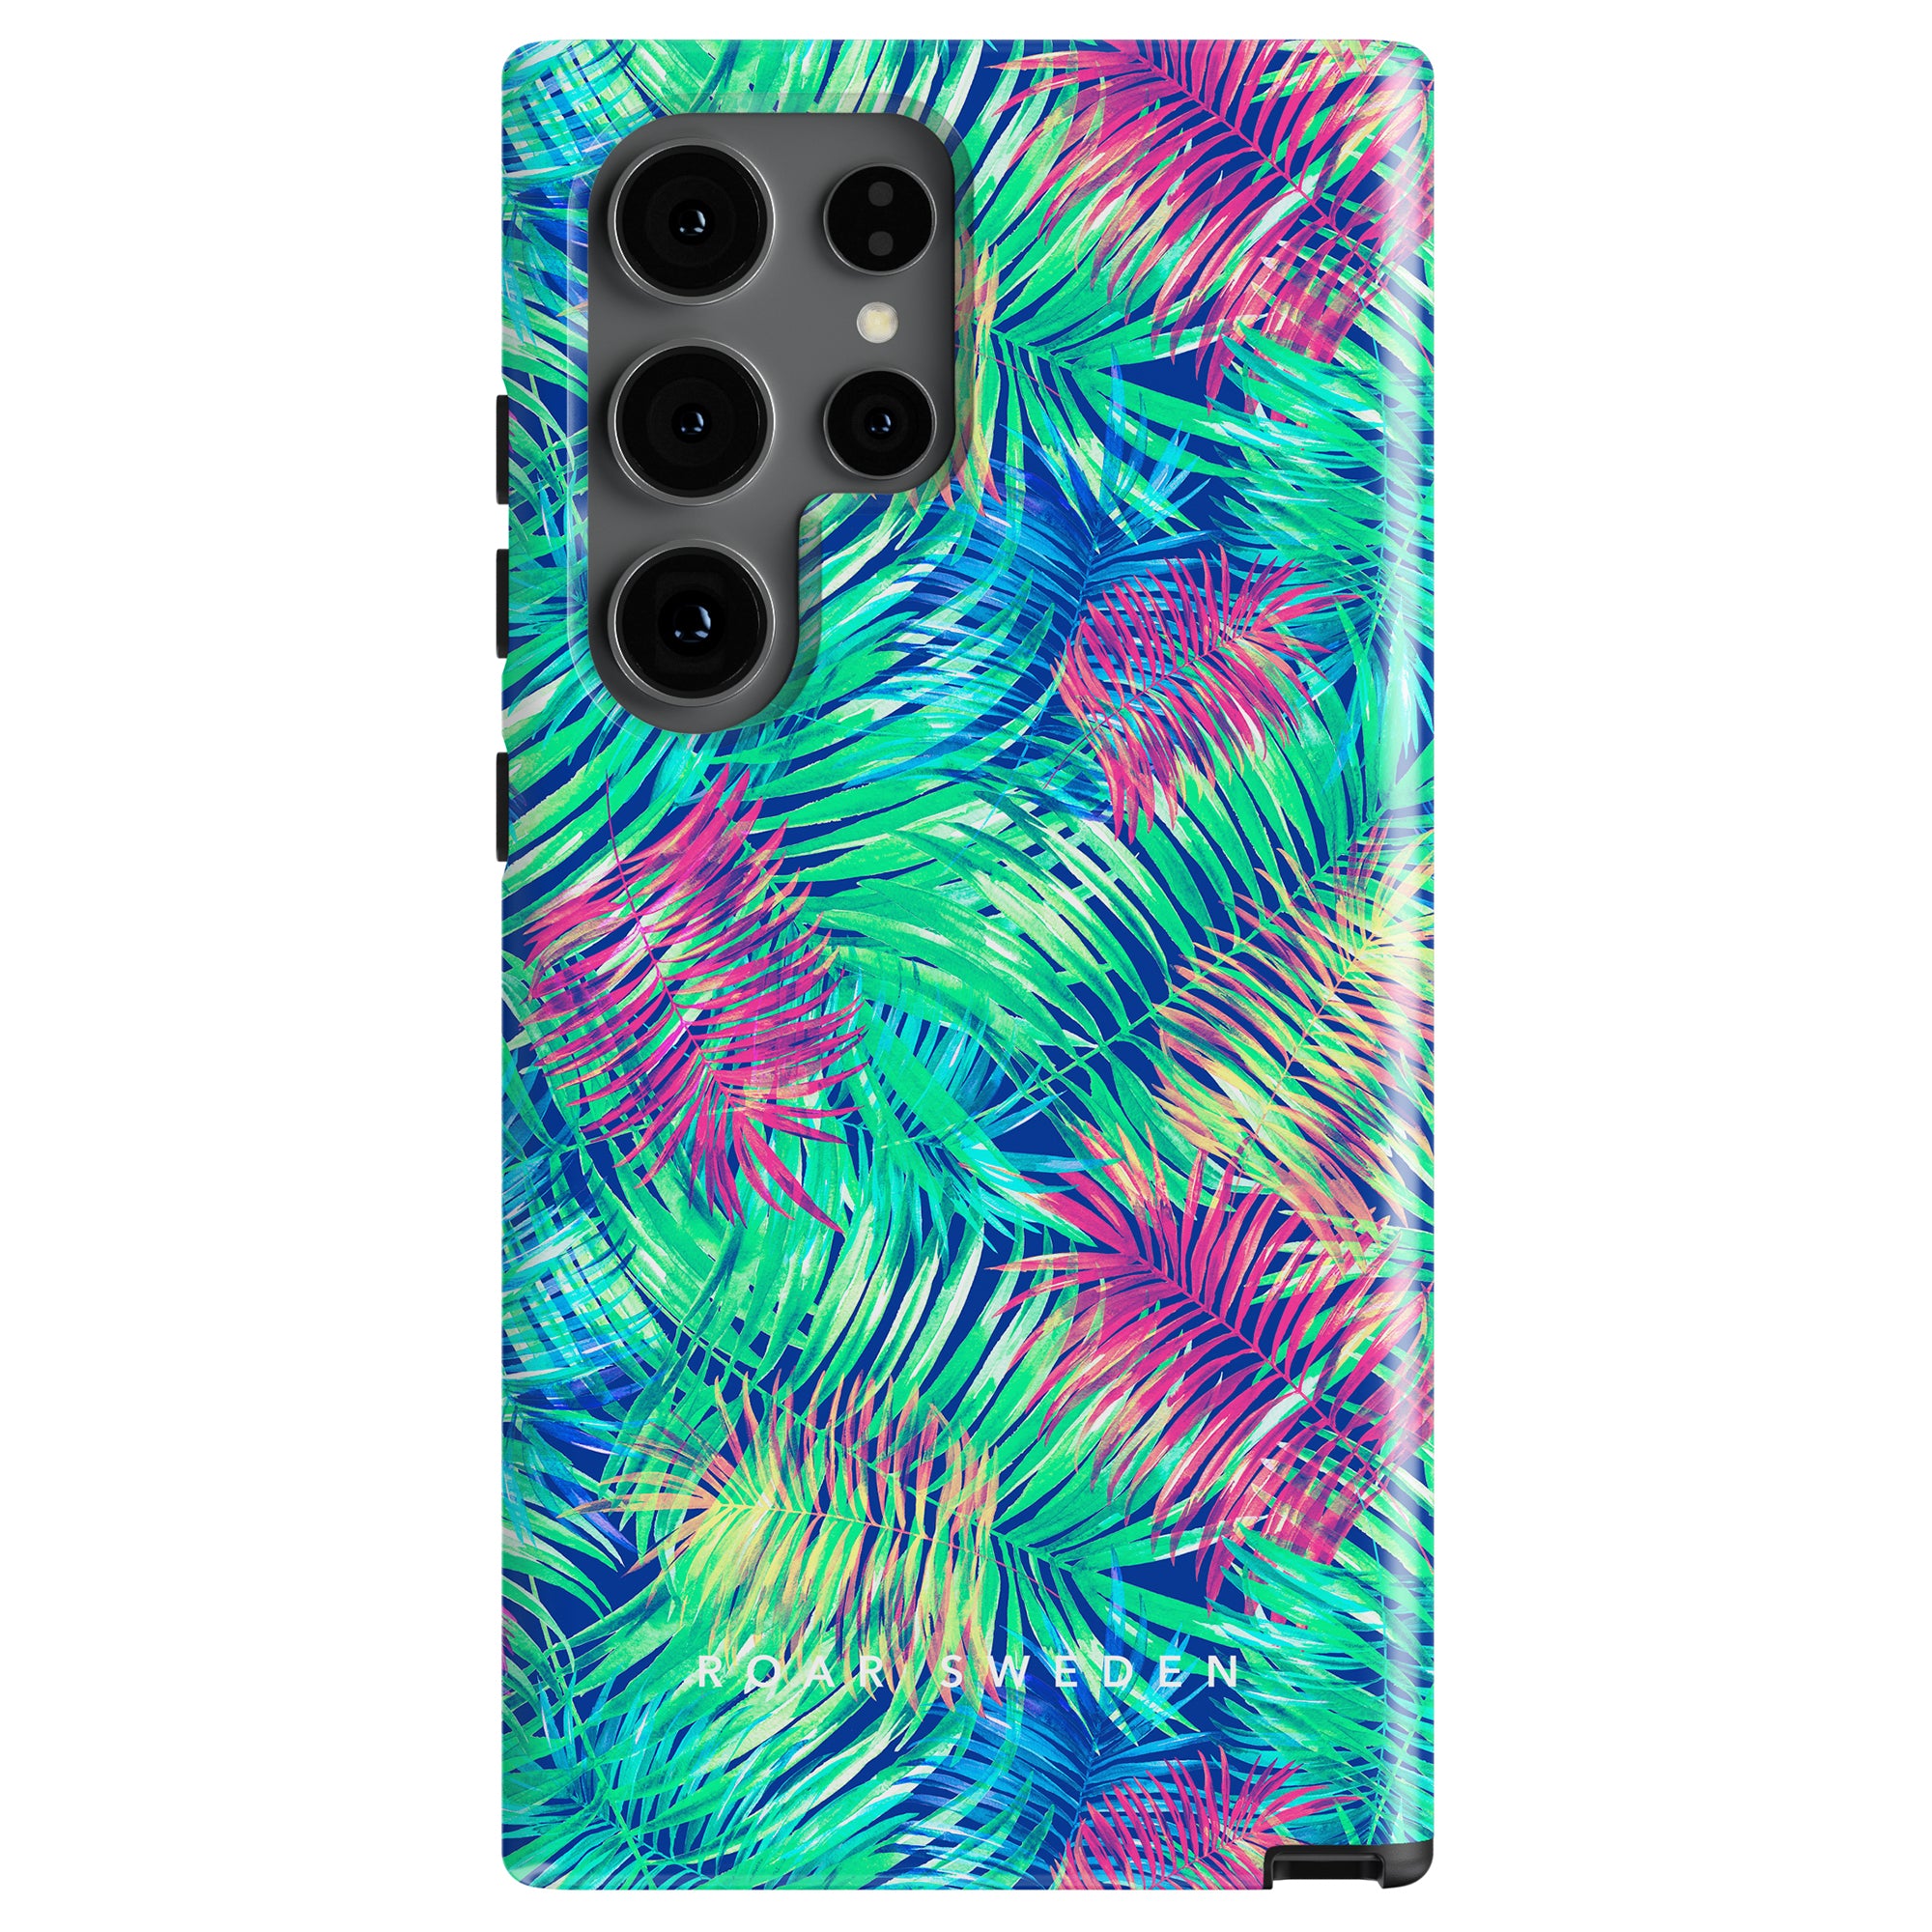 Smartphone case with a vibrant palm leaf pattern in green, blue, and purple hues. The Breeze - Tough case features a cutout for multiple camera lenses and includes the brand name "Roar Sweden" at the bottom.